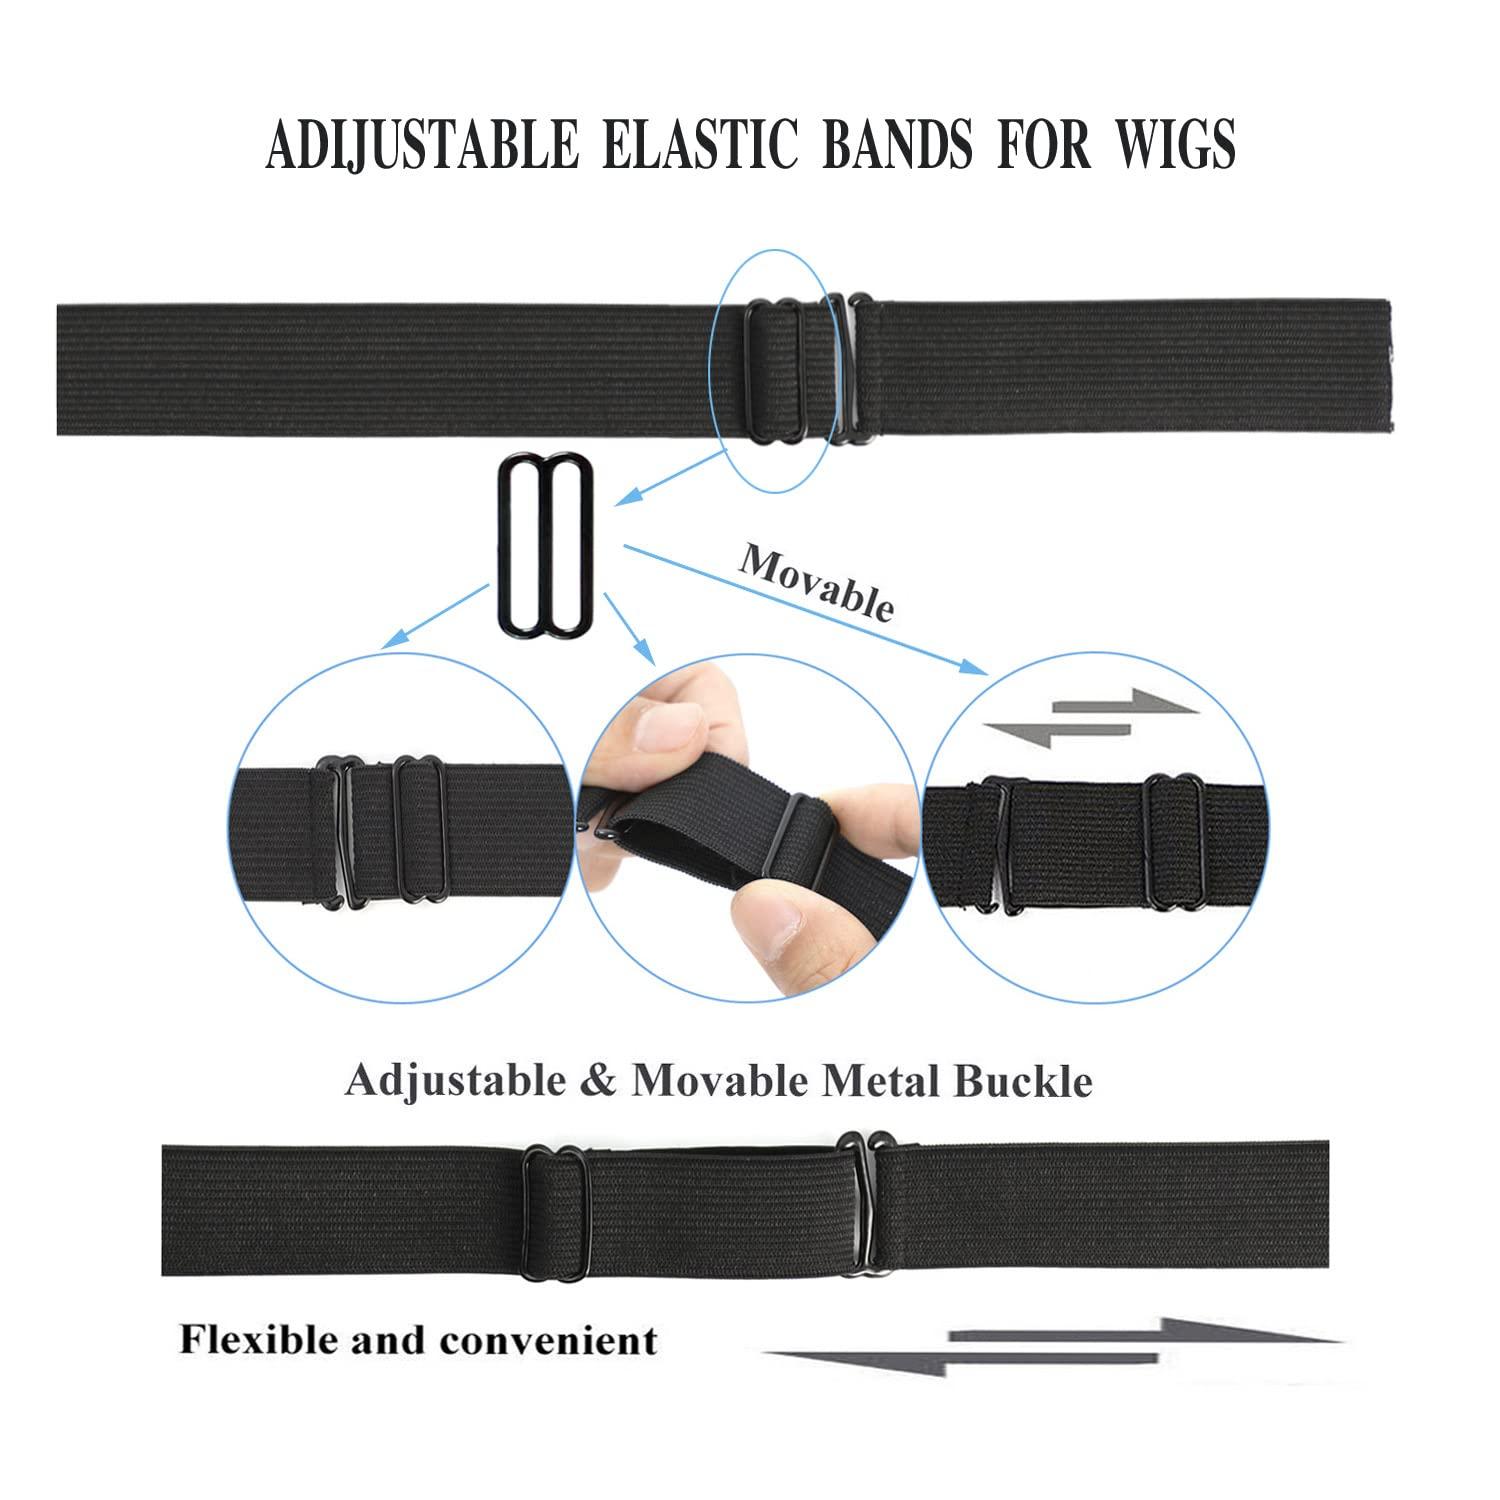 xuxisowo 30PCS Tricolor Elastic Bands For Wig Edges, Adjustable Wig Bands  For Wigs And Wig Caps, Adjustable Wig Straps For Keeping Wigs in Place